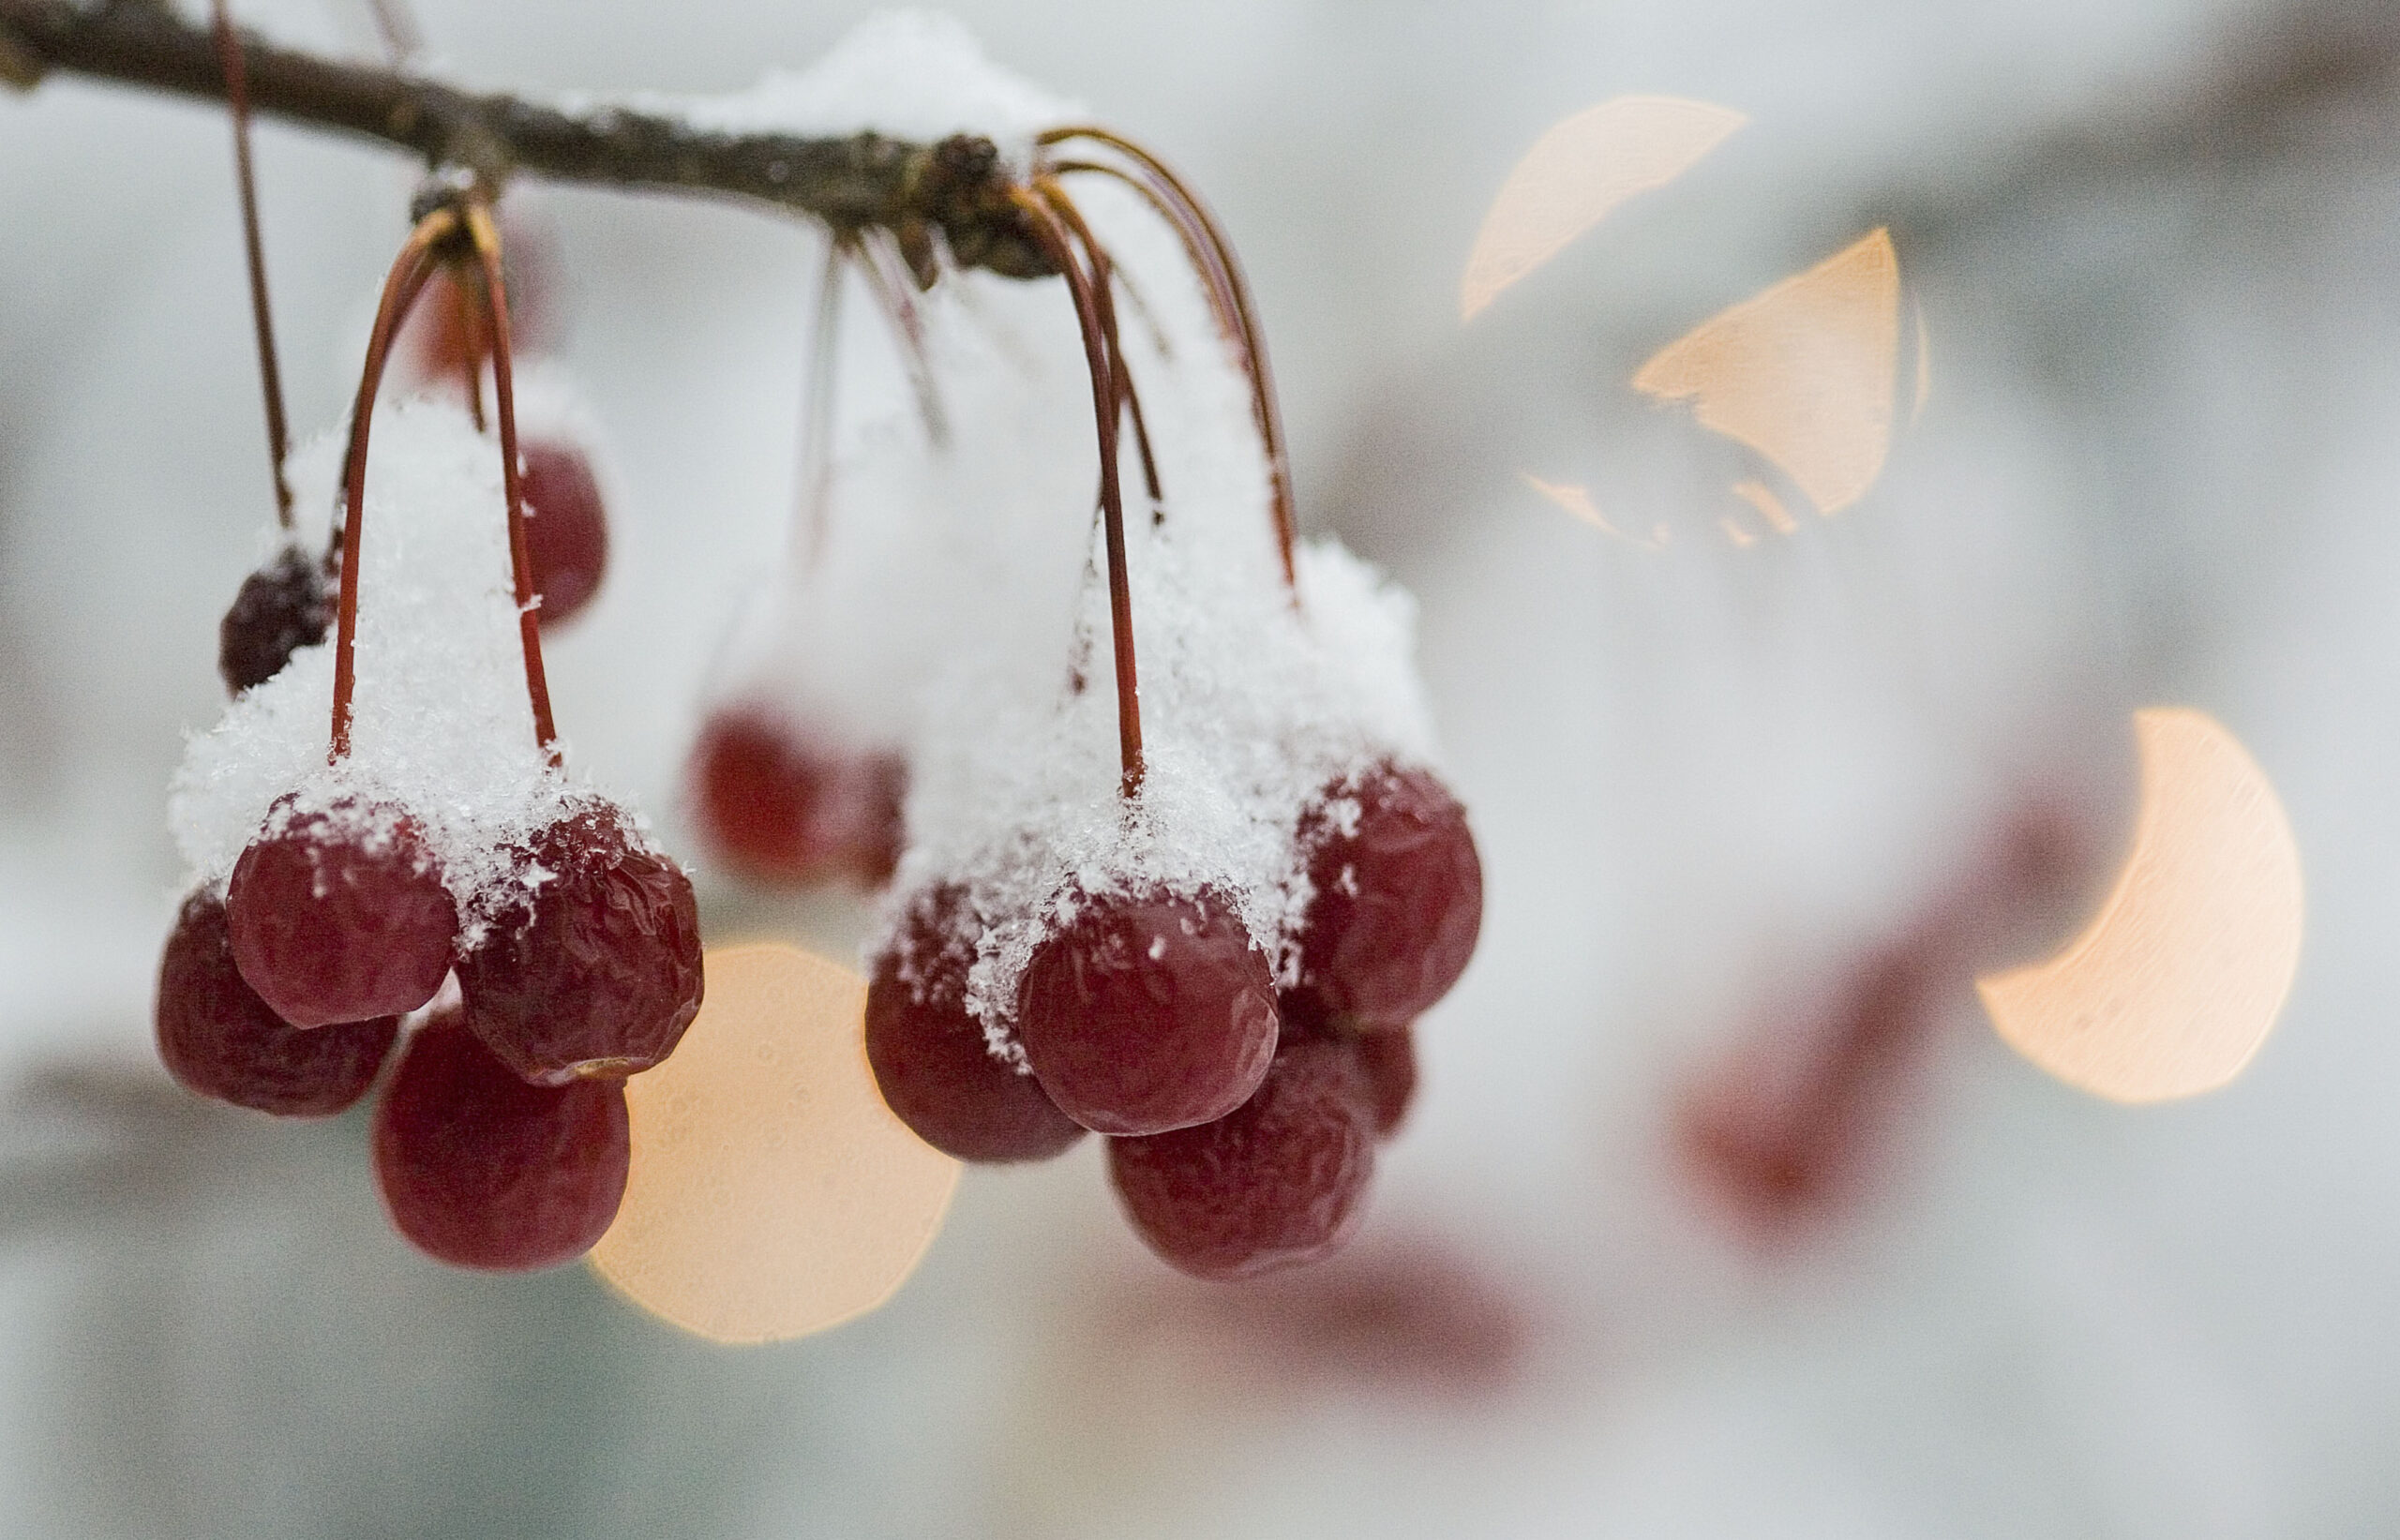 Snow covered berries